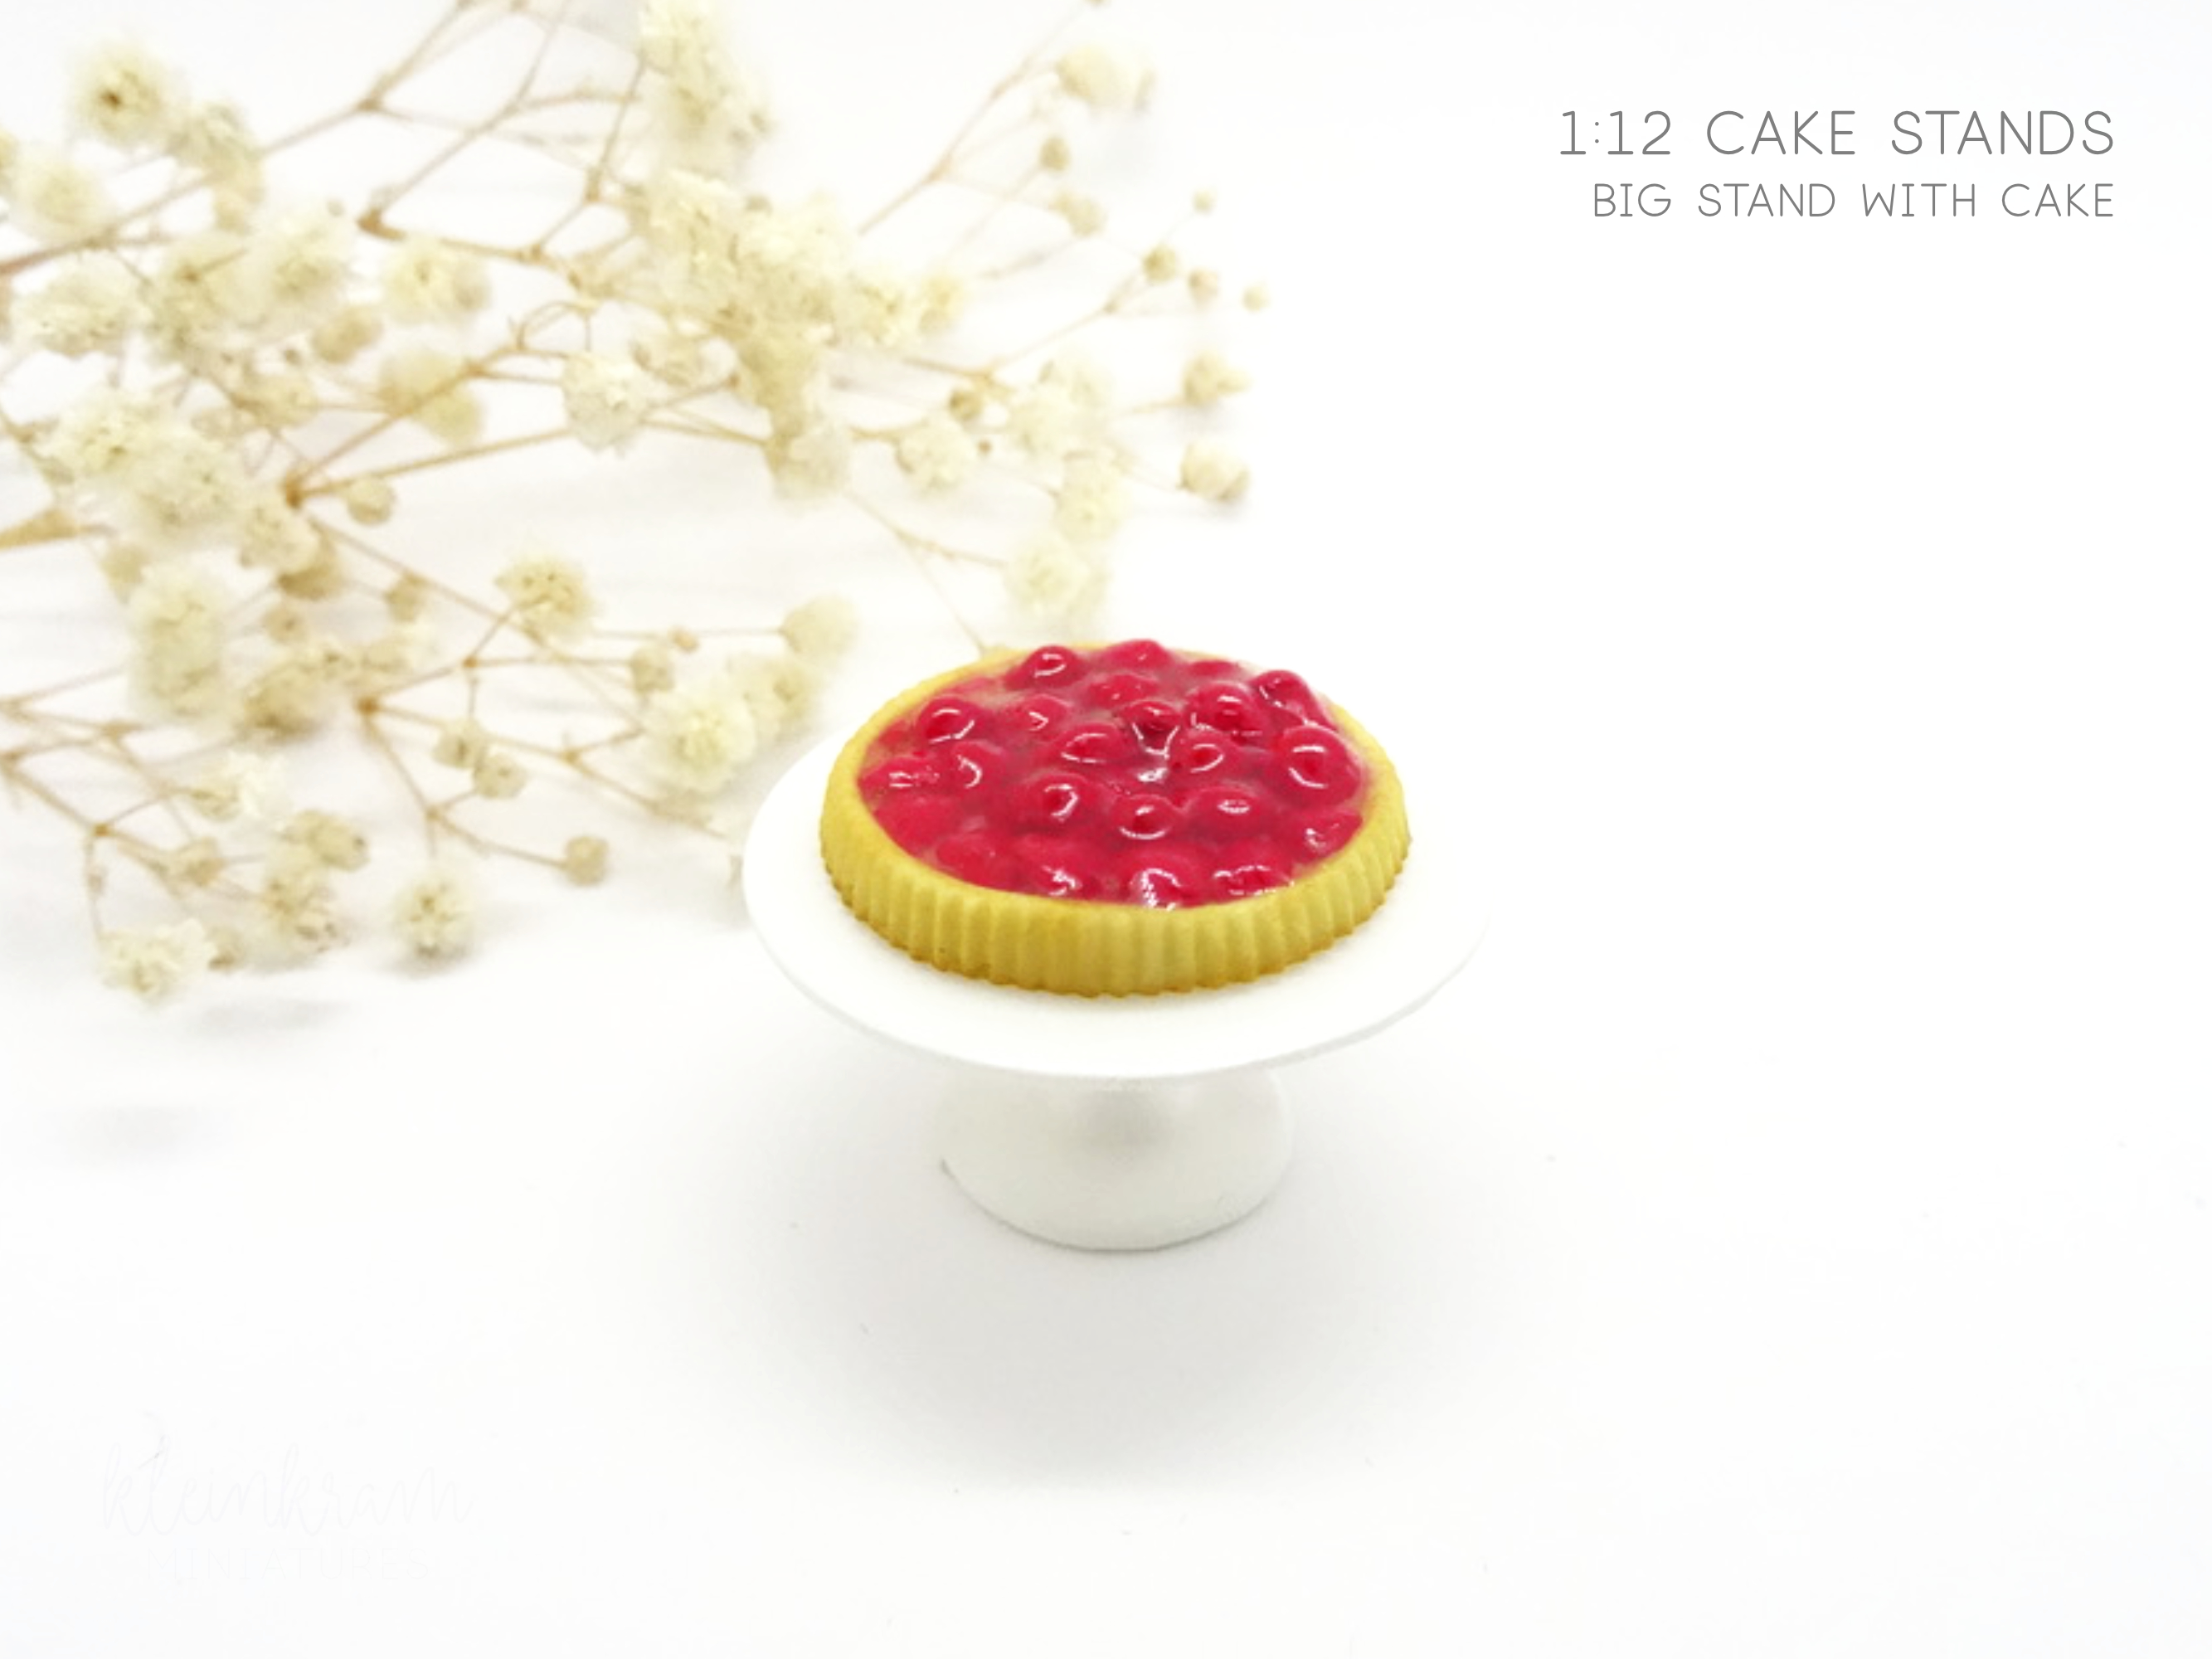 Cake Stands - Set of 2 - 1/12 Miniature